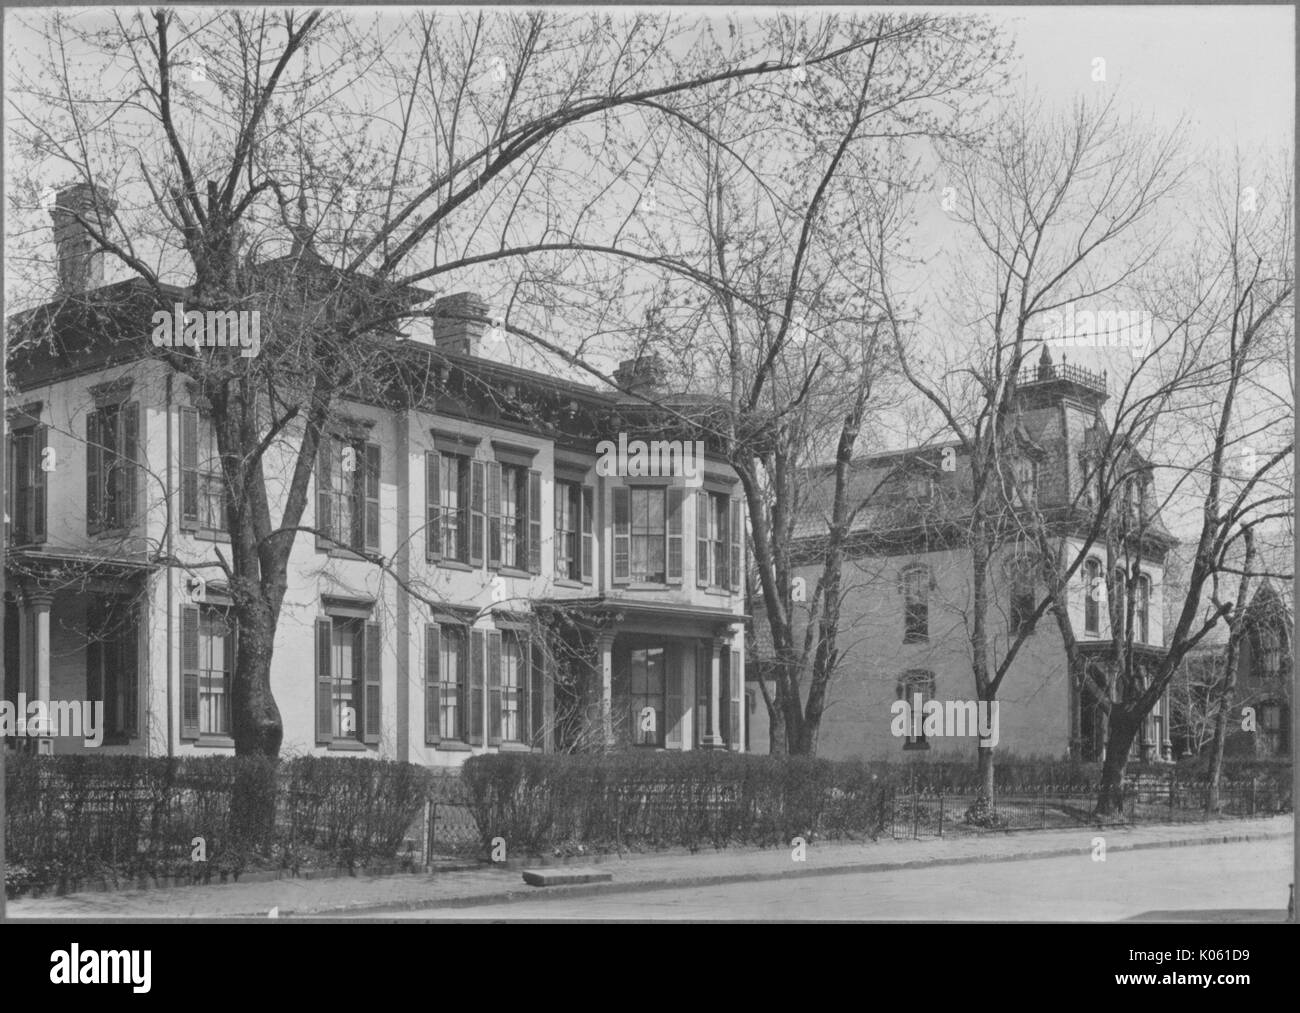 View of a street in the foreground and three homes in the background, the homes are all at least two-story and are all different designs, there are trees and bushes that line the property between the homes and the street, United States, 1910. This image is from a series documenting the construction and sale of homes in the Roland Park/Guilford neighborhood of Baltimore, a streetcar suburb and one of the first planned communities in the United States. Stock Photo